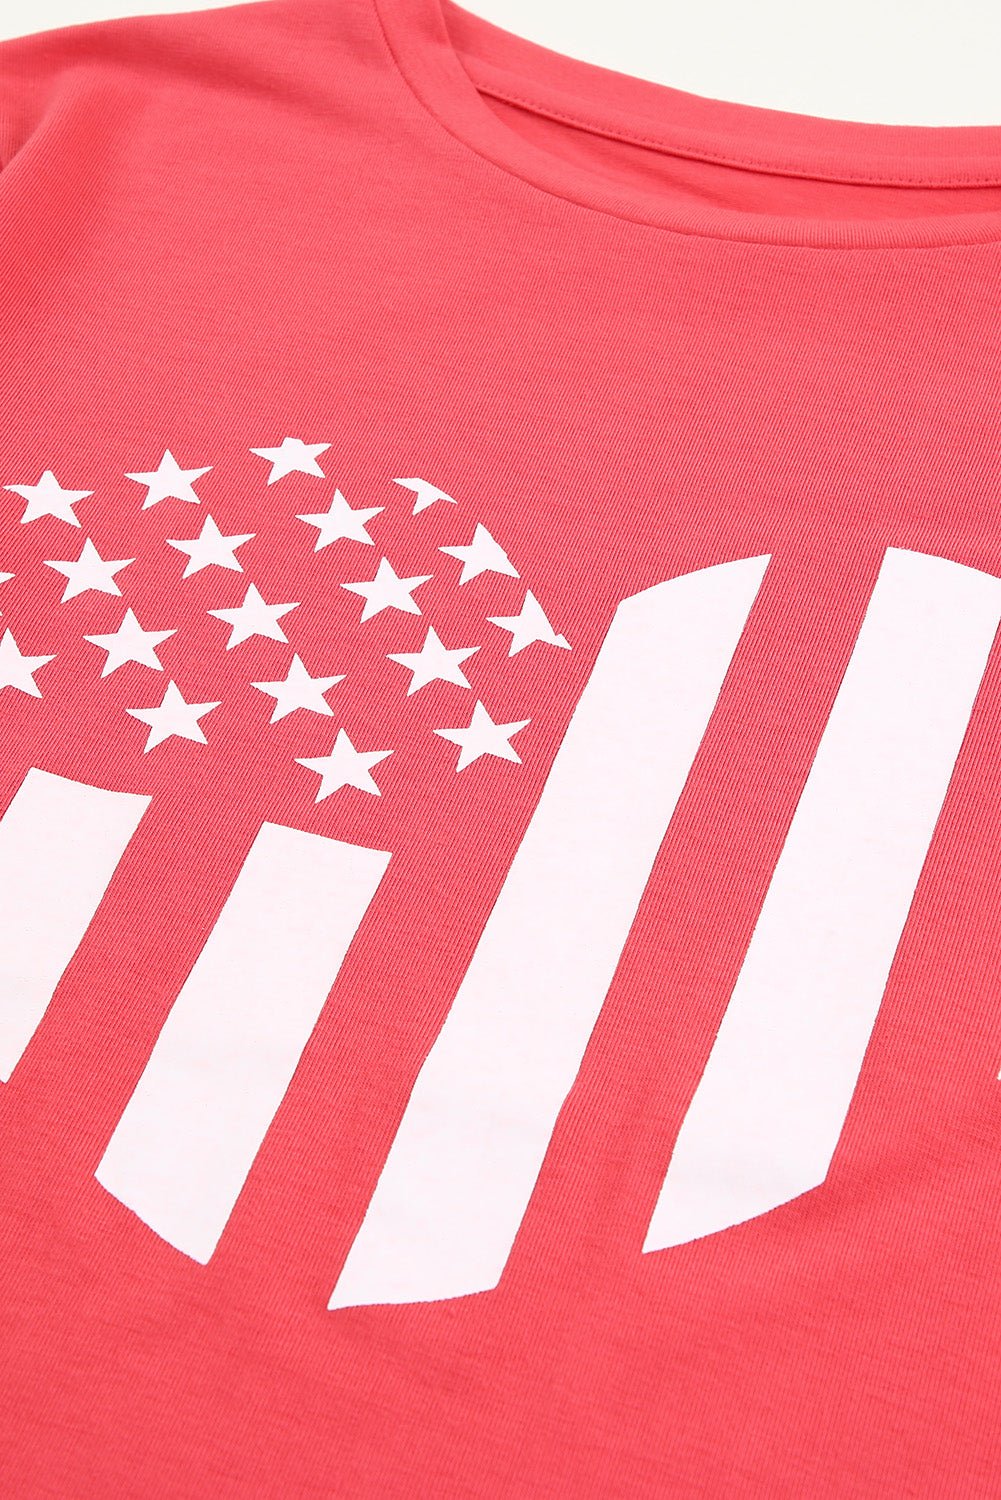 Stars and Stripes Graphic Tee Shirt - OMG! Rose